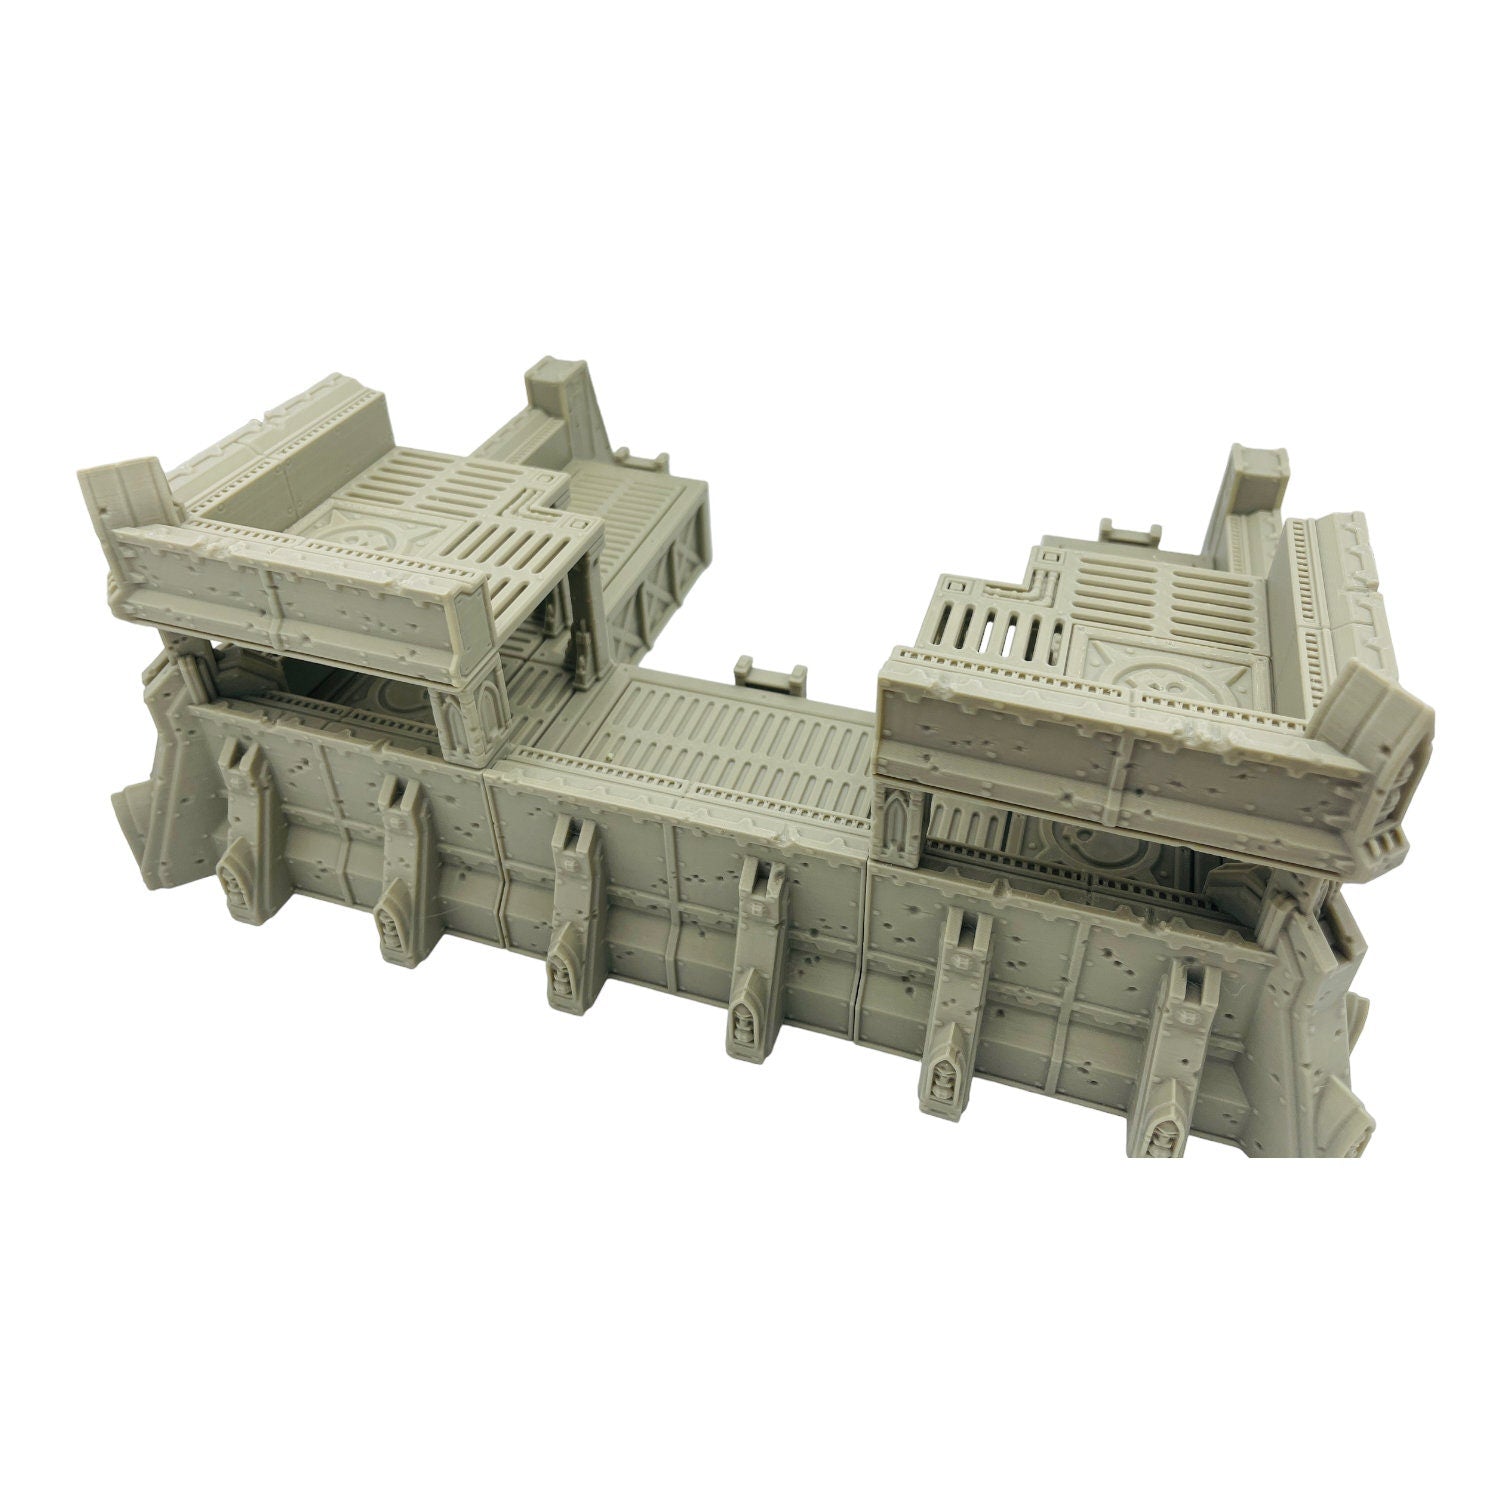 Ruins of the Empire Fortification HQ / Forbidden Prints / RPG and Wargame 3d Printed Tabletop Terrain / Licensed Printer